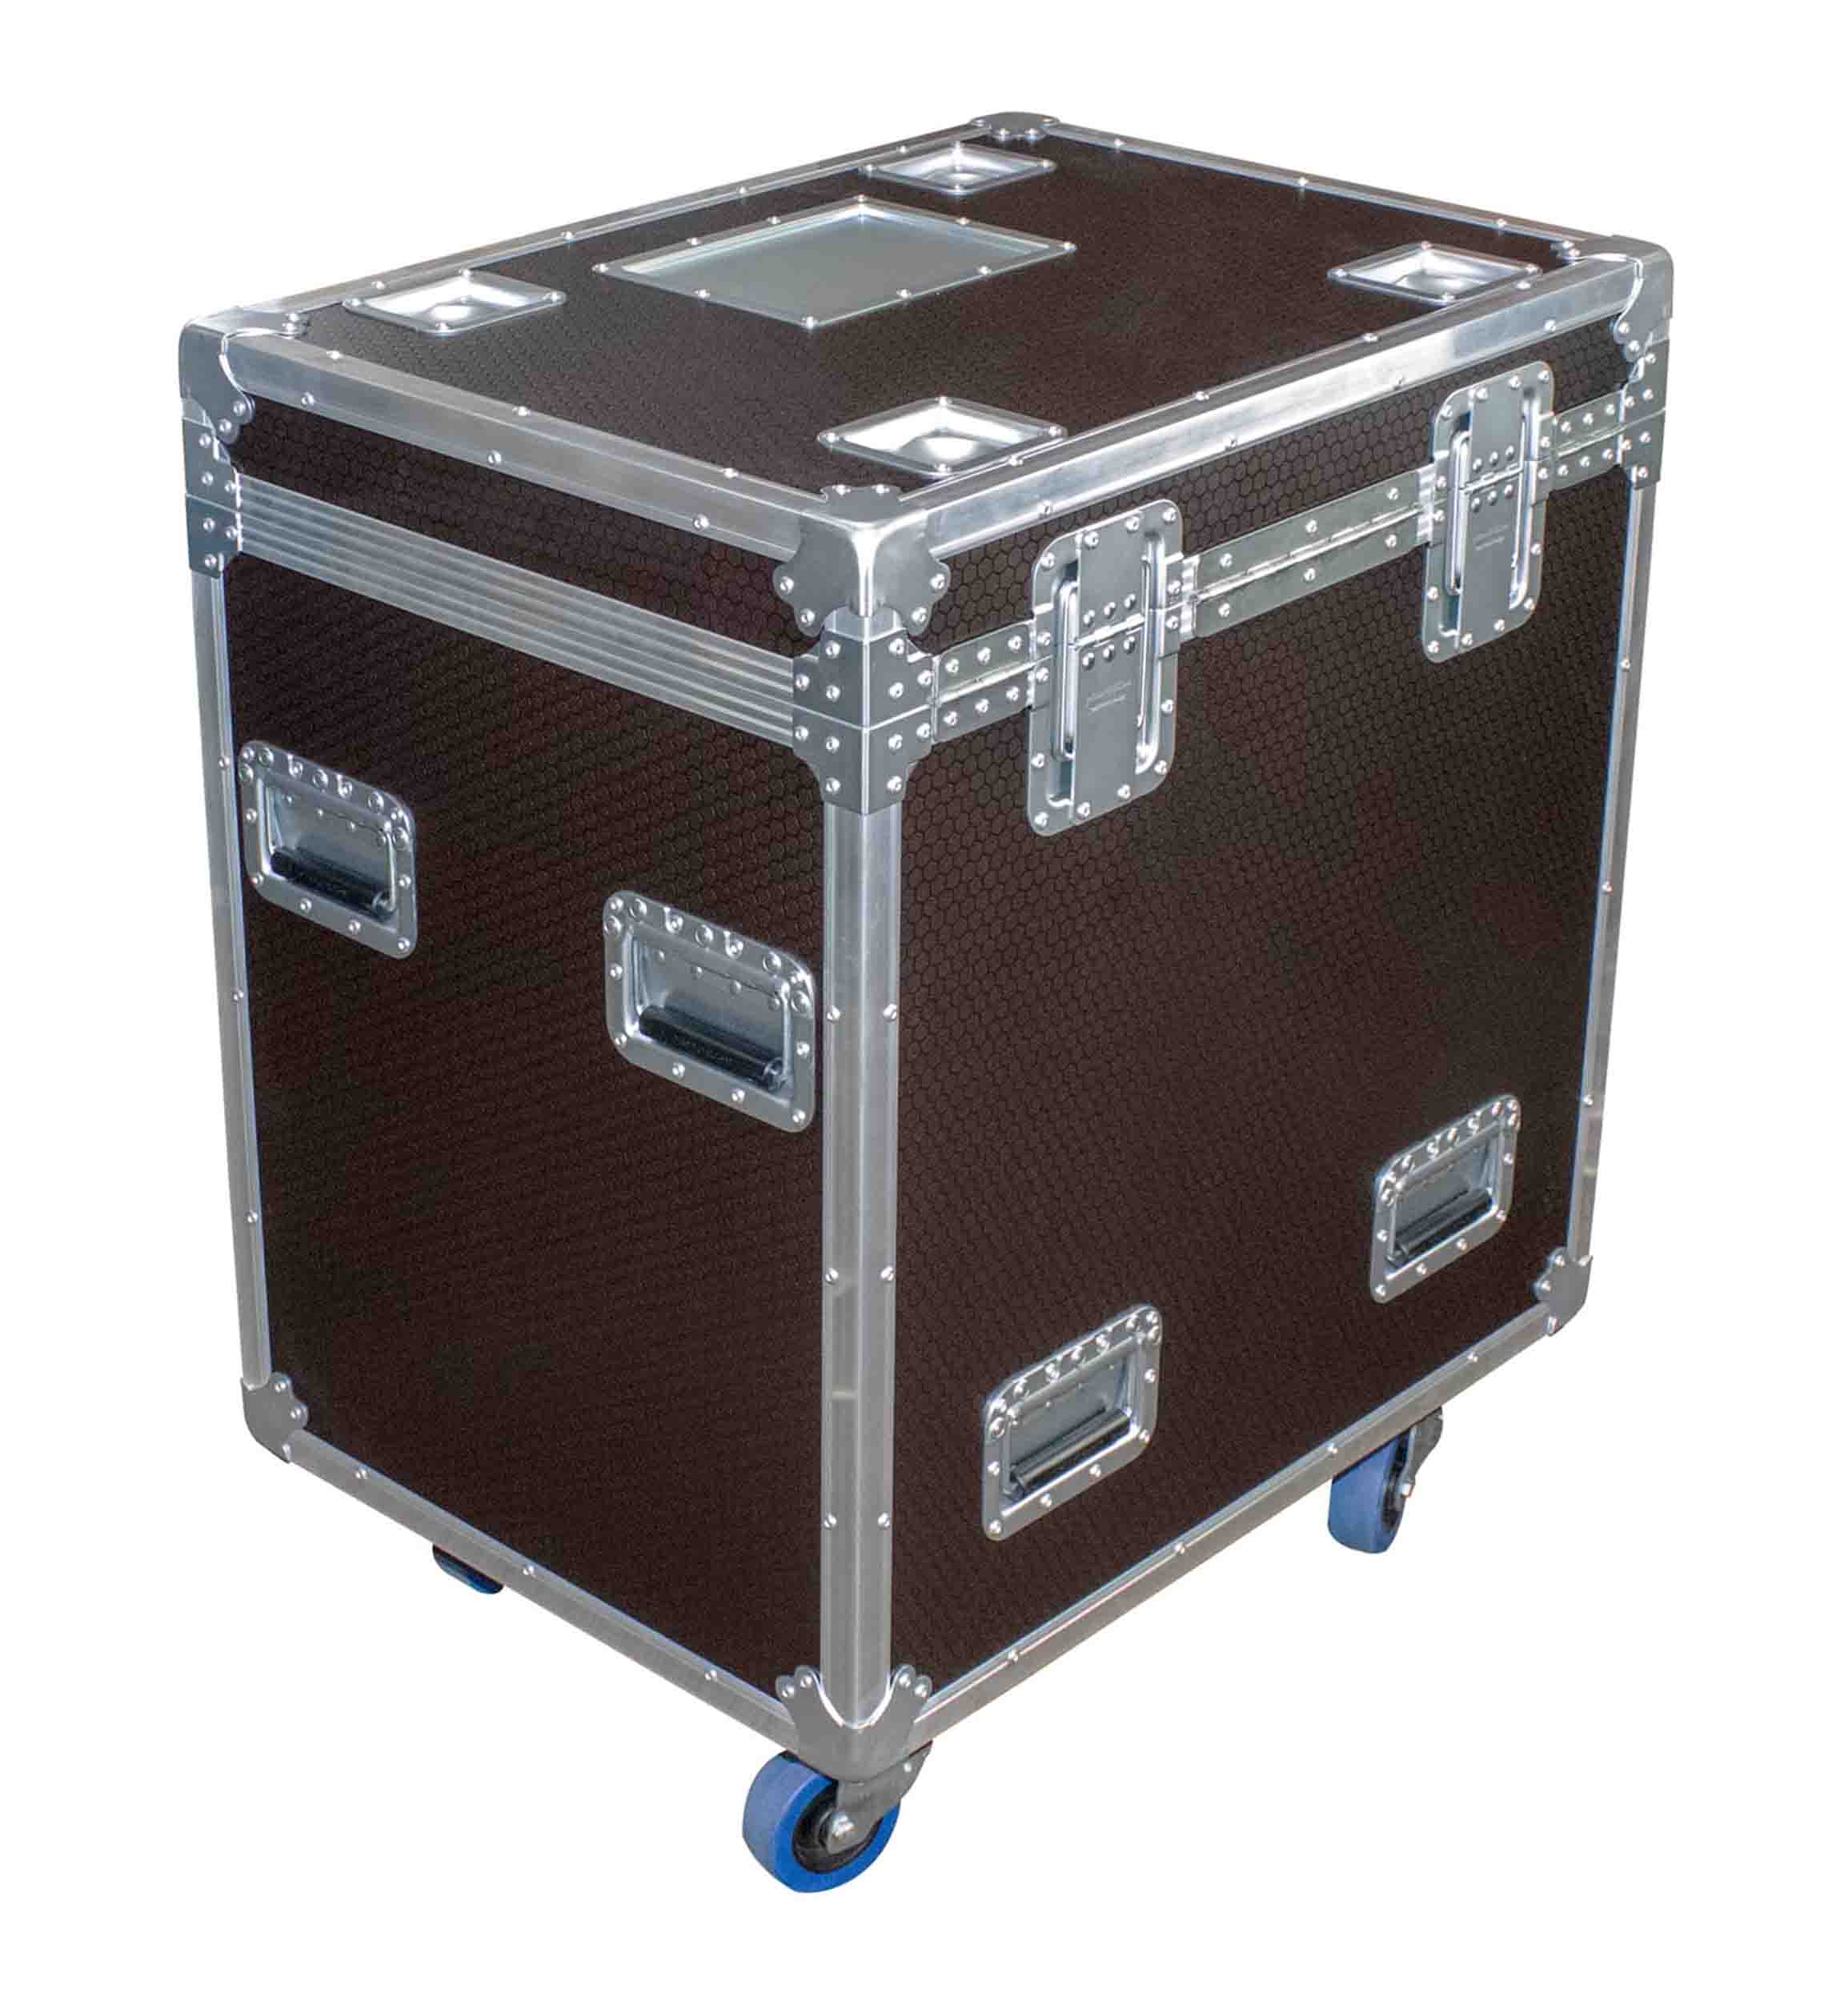 Odyssey OPT302236WBRN, Professional Brown Hex Board Utility Tour Trunk Case with Caster Wheels by Odyssey